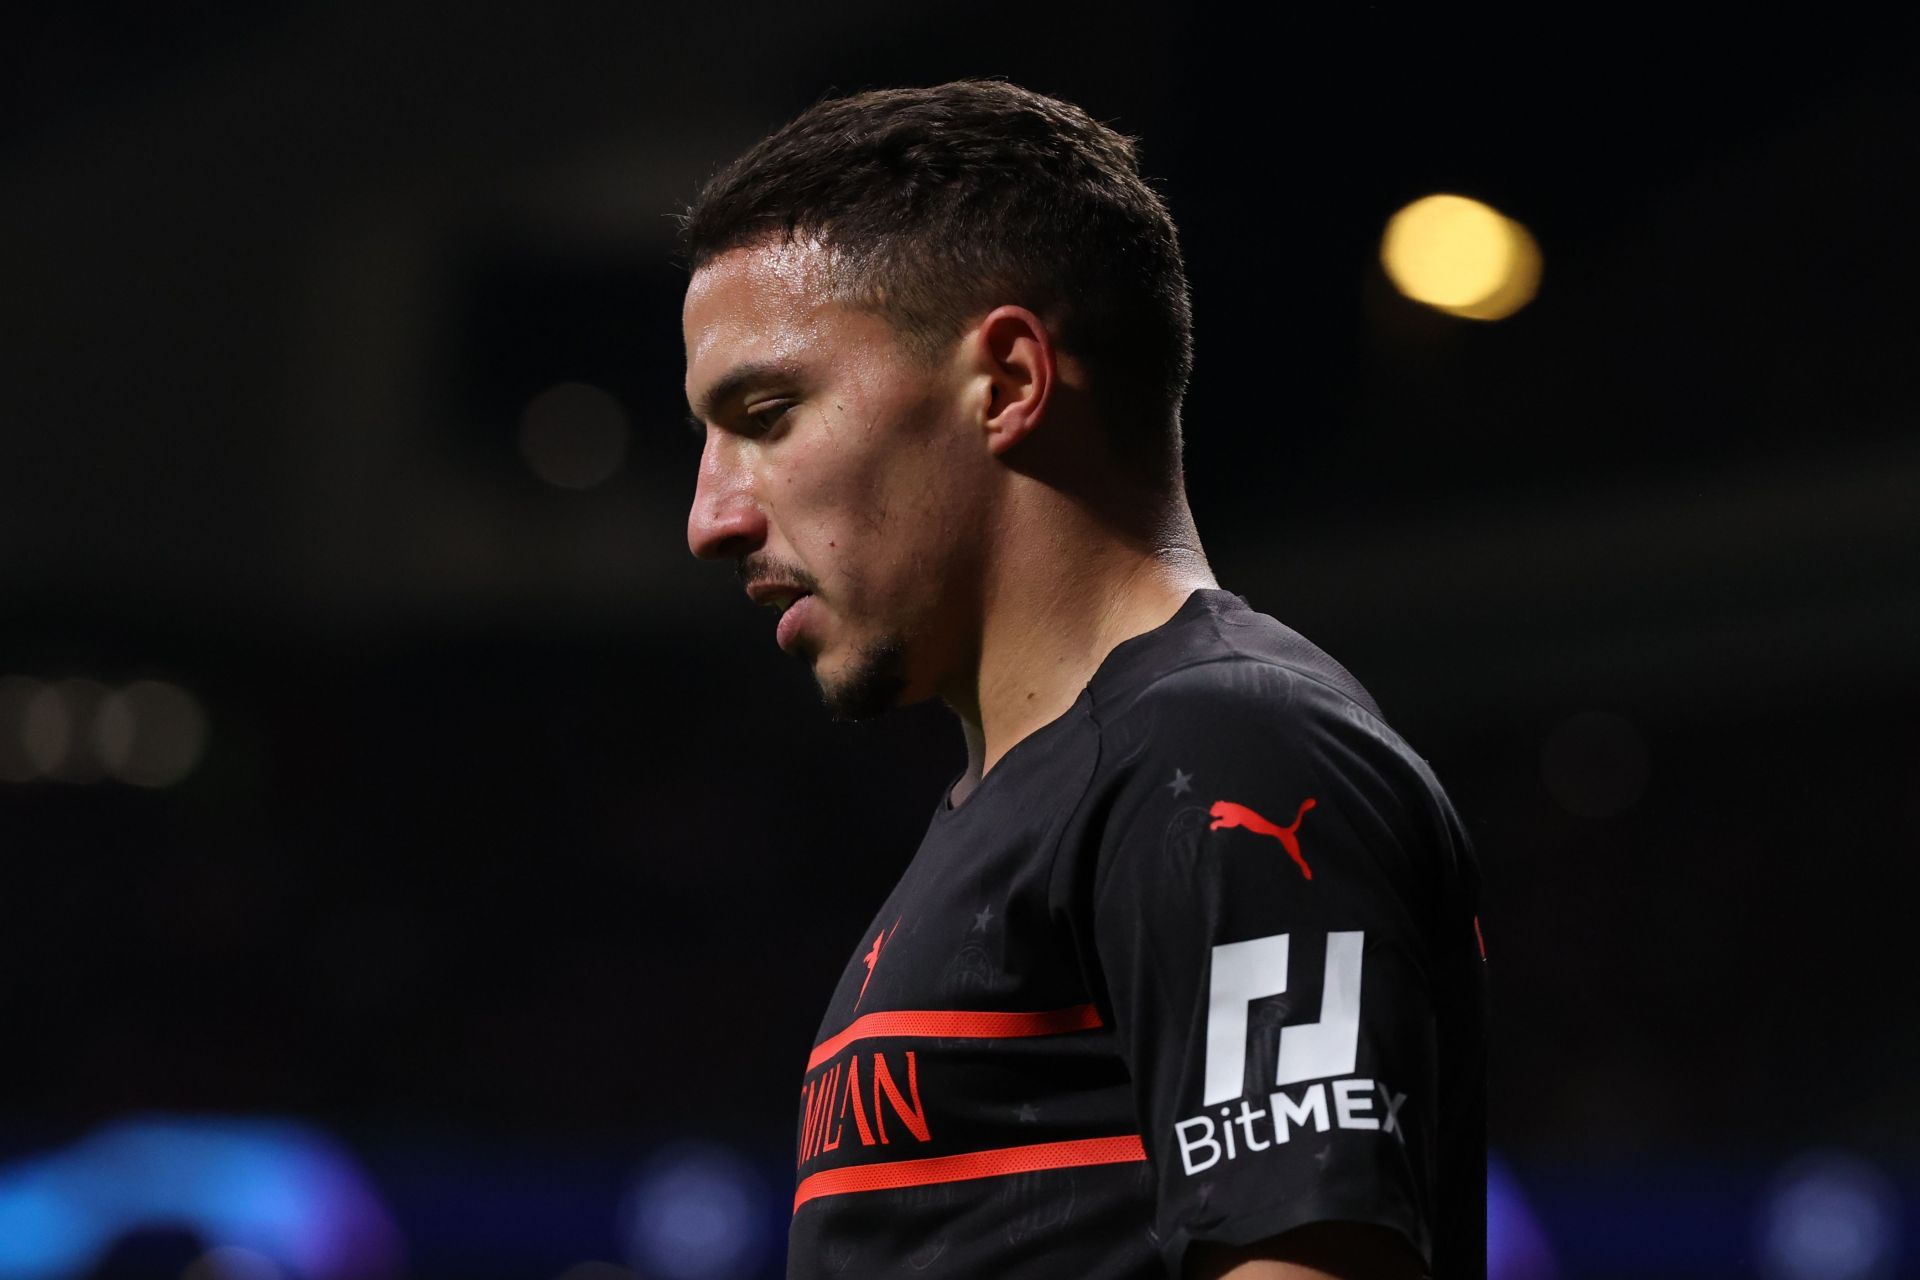 Bennacer is gaining interest from the Premier League